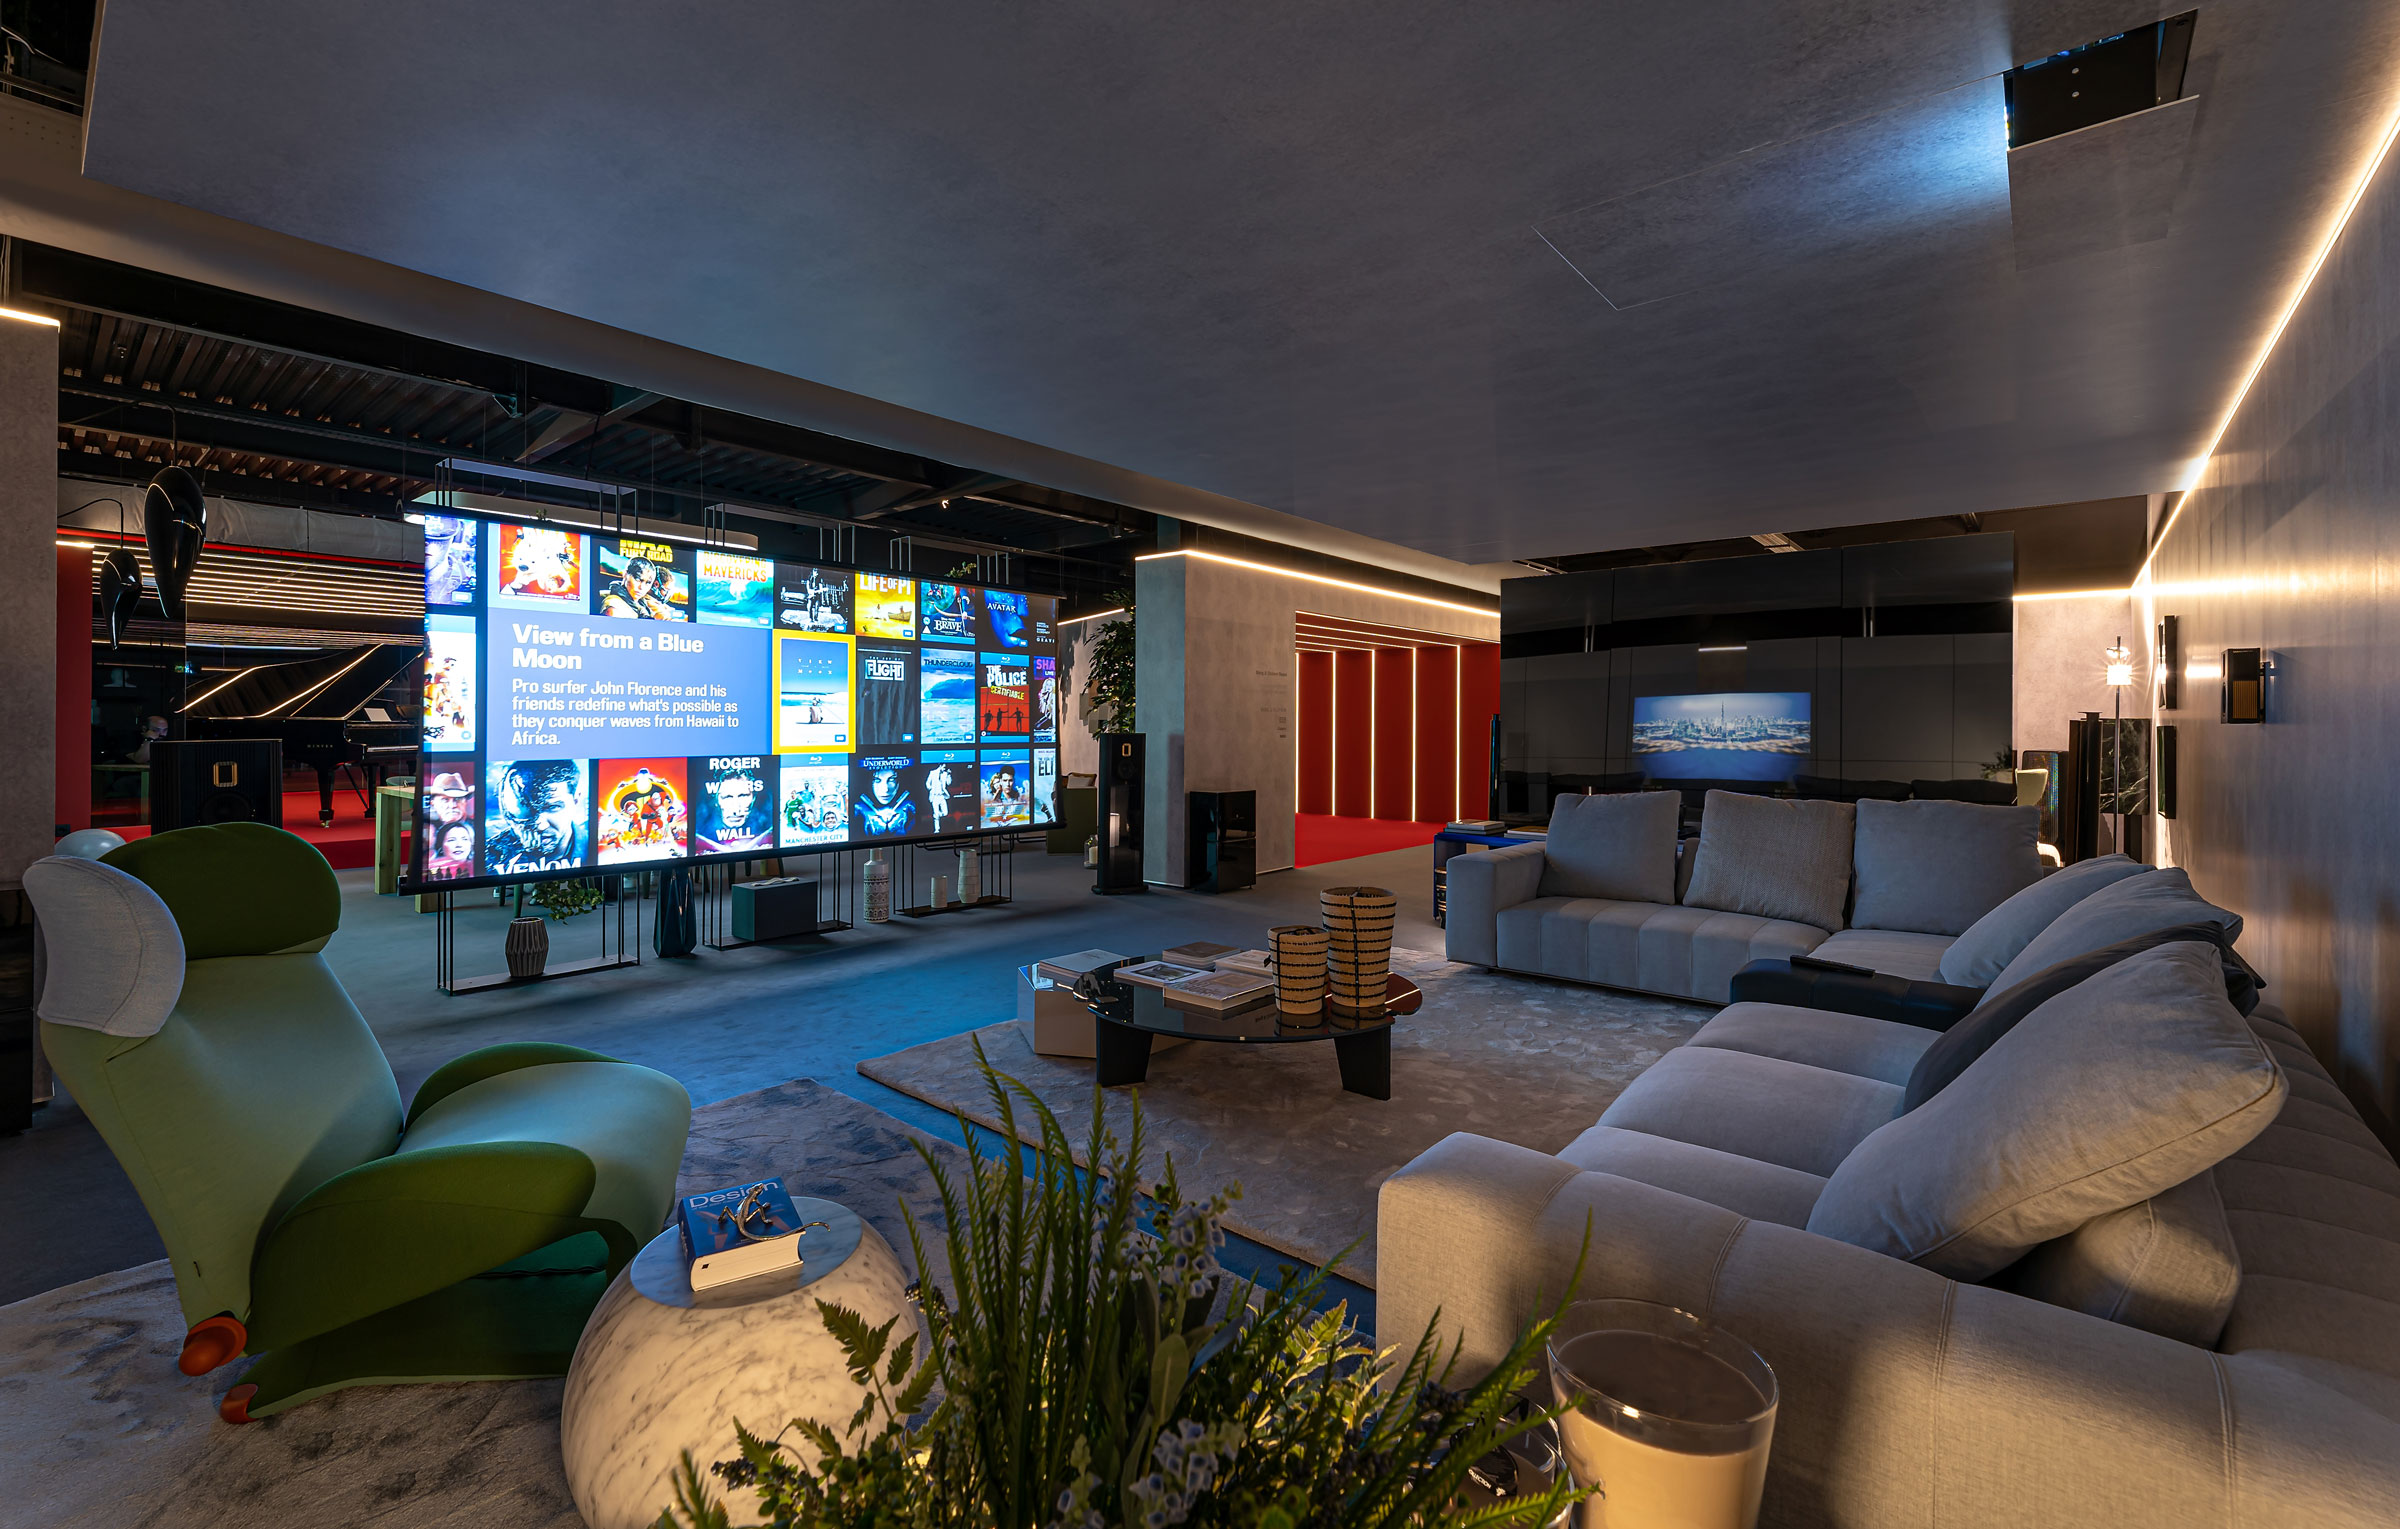 Levitating Showroom Demo Sets a New Media Room and Home Theater Standard